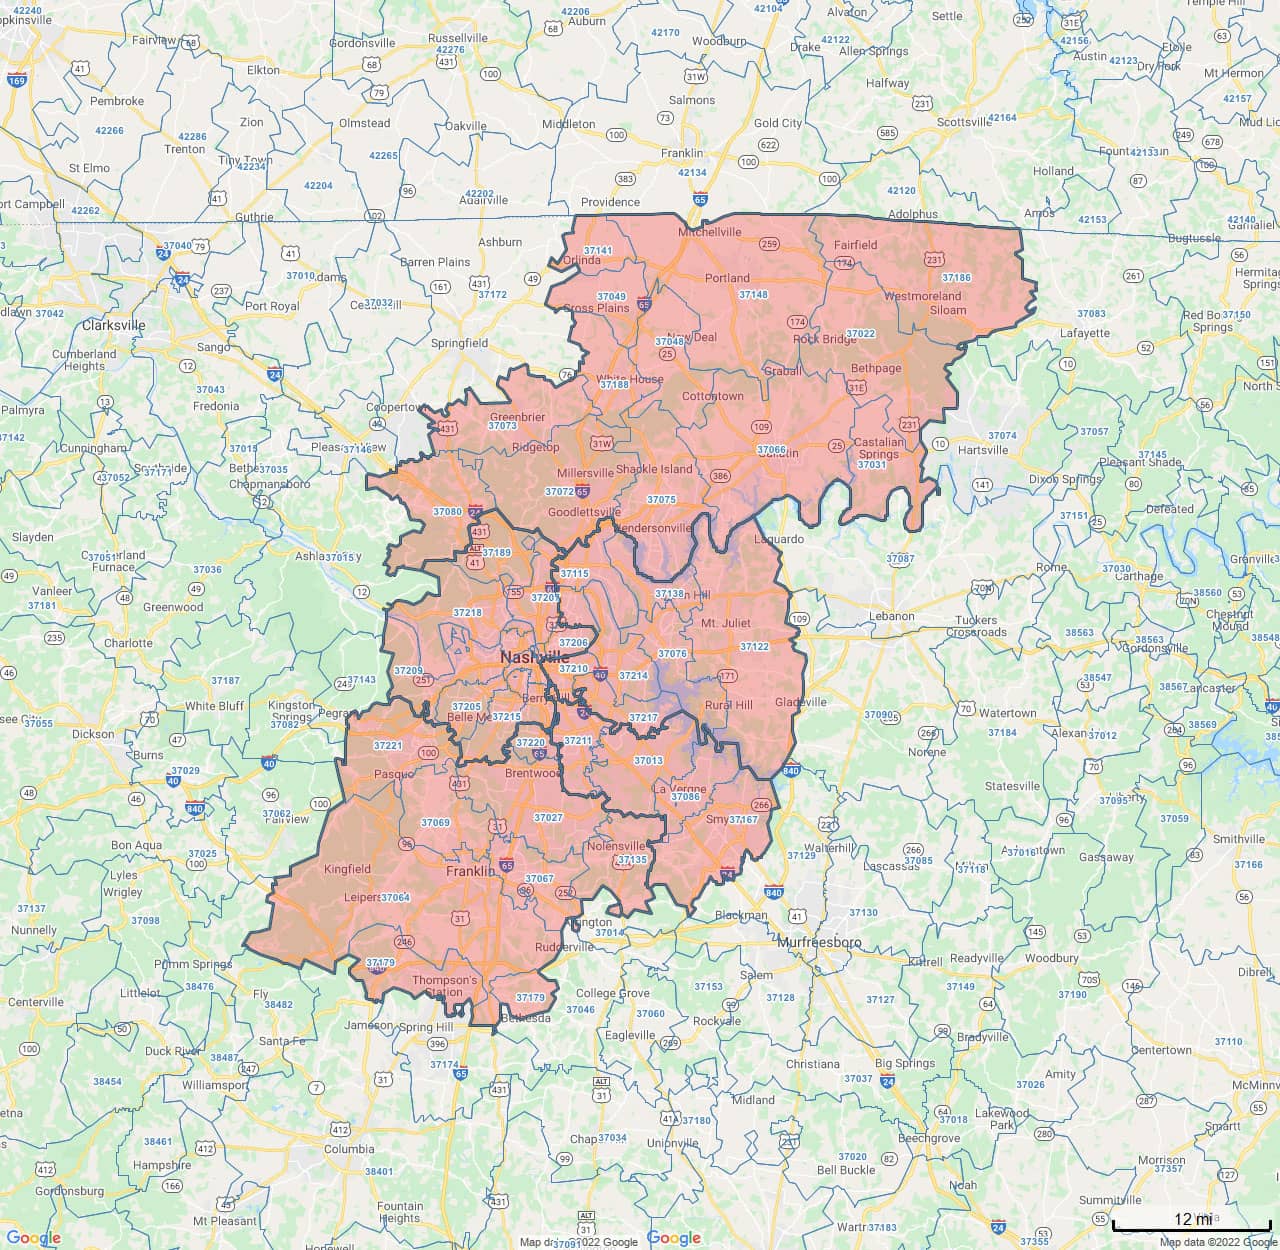 All Dry Services Area Coverage Map for Greater Nashville, Tennessee